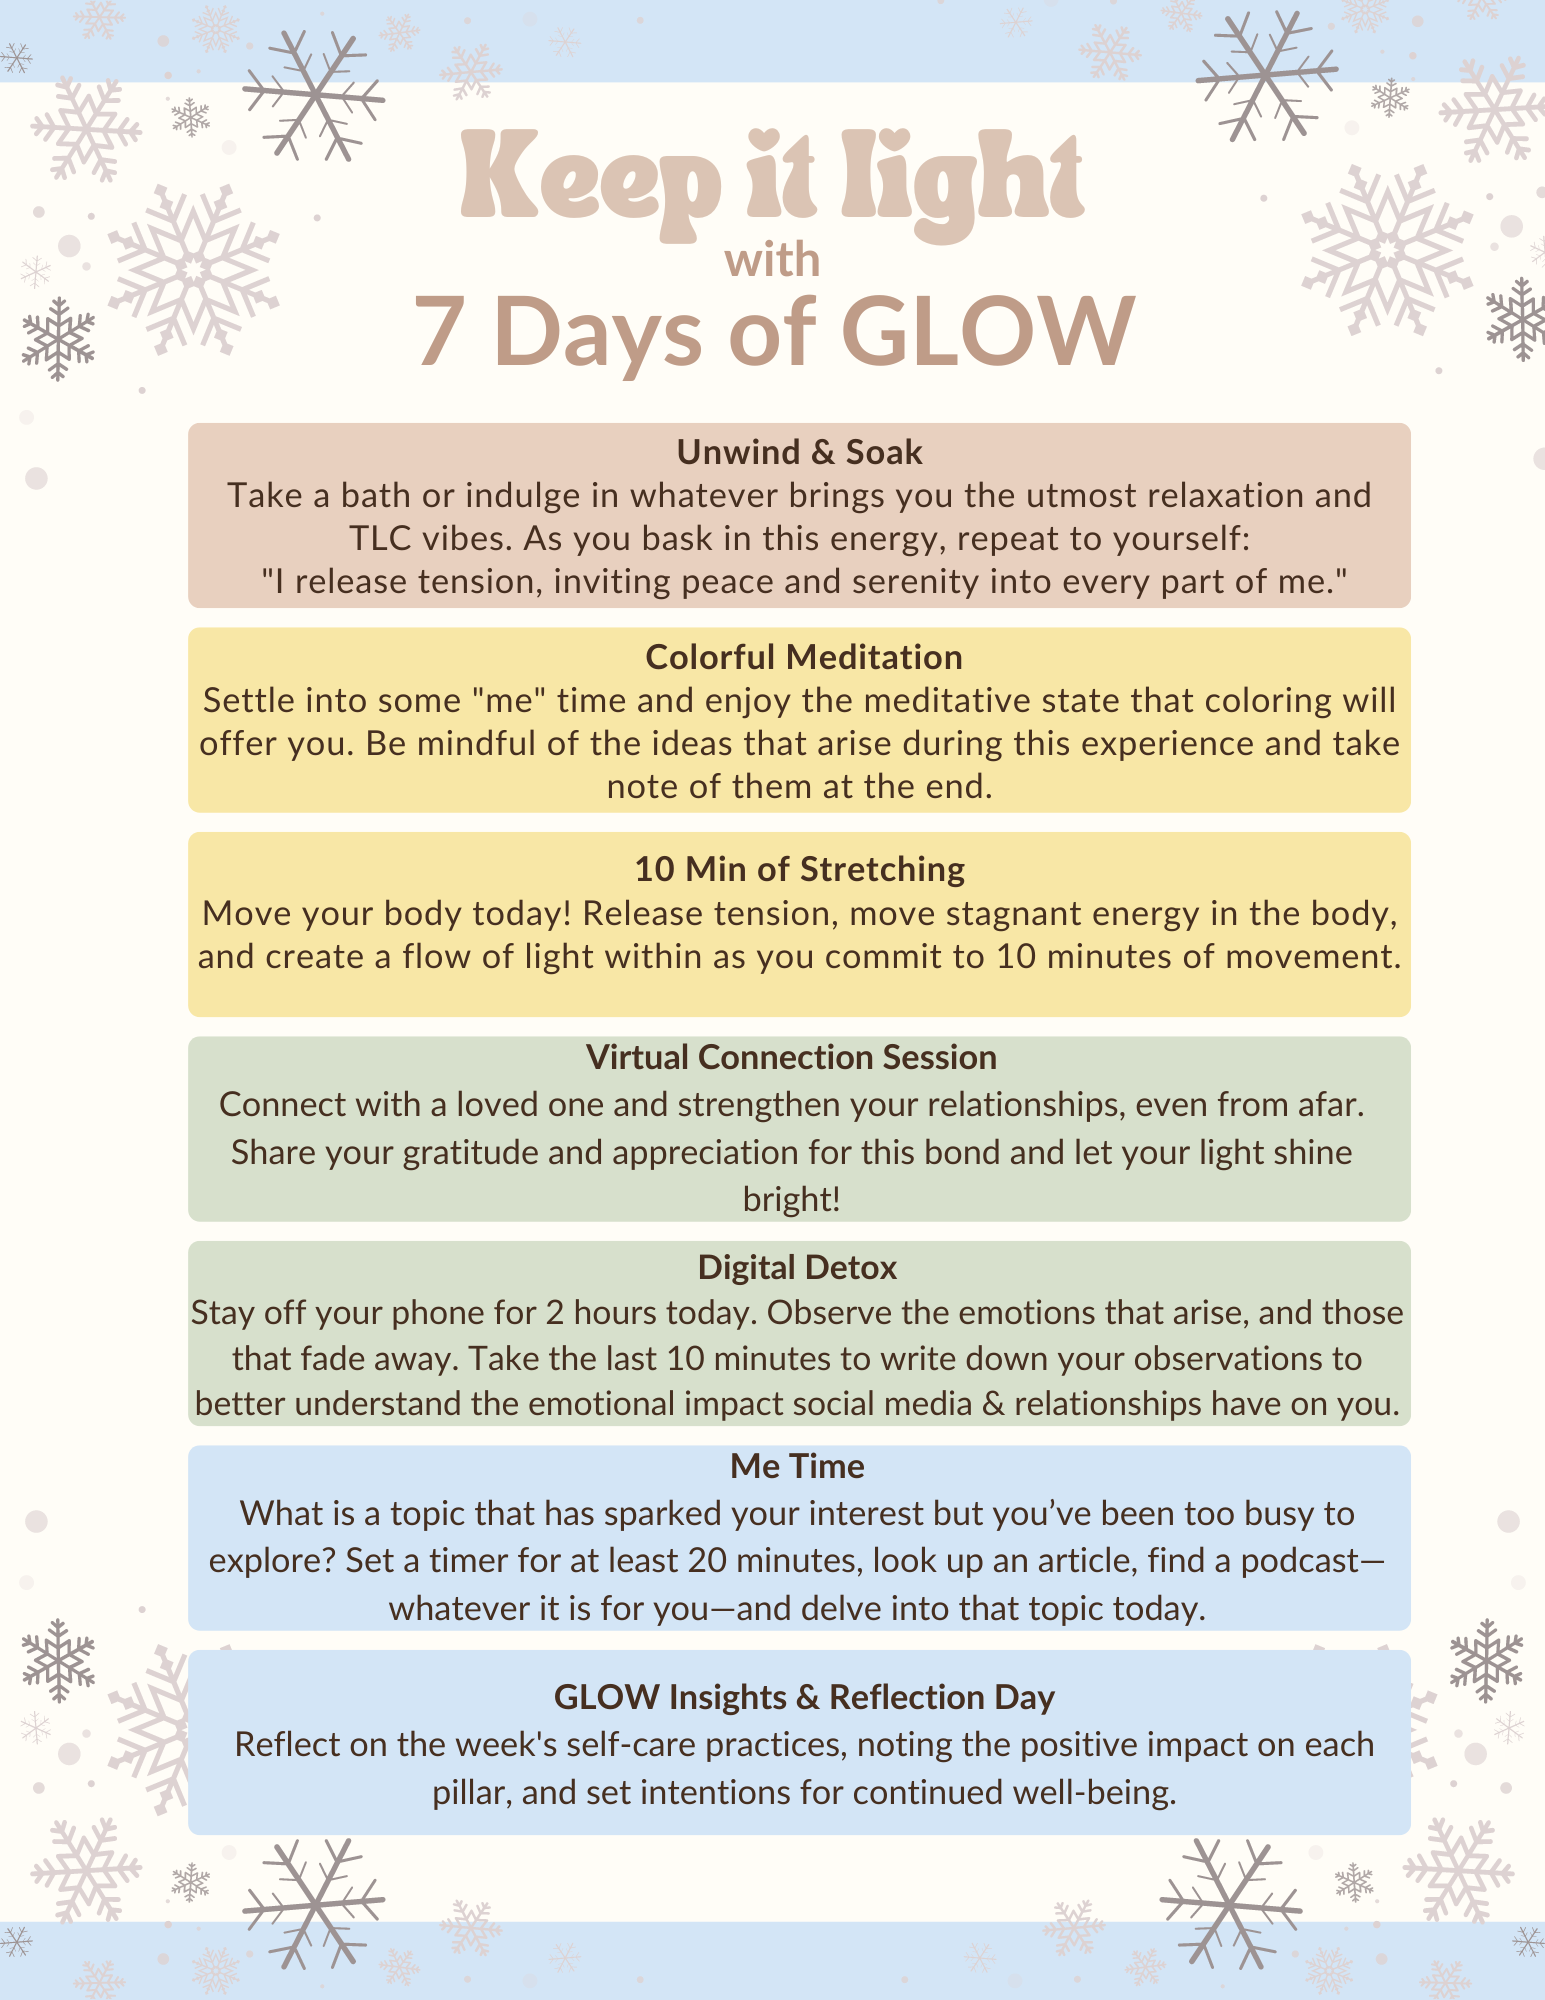 Keep it light - Holiday GLOW Wellness Guide, 7 Days of GLOW, Wellness PDF, Including Unwind & Soak, Meditation, Stretching, Connection, Digital Detox, Me Time and Reflection